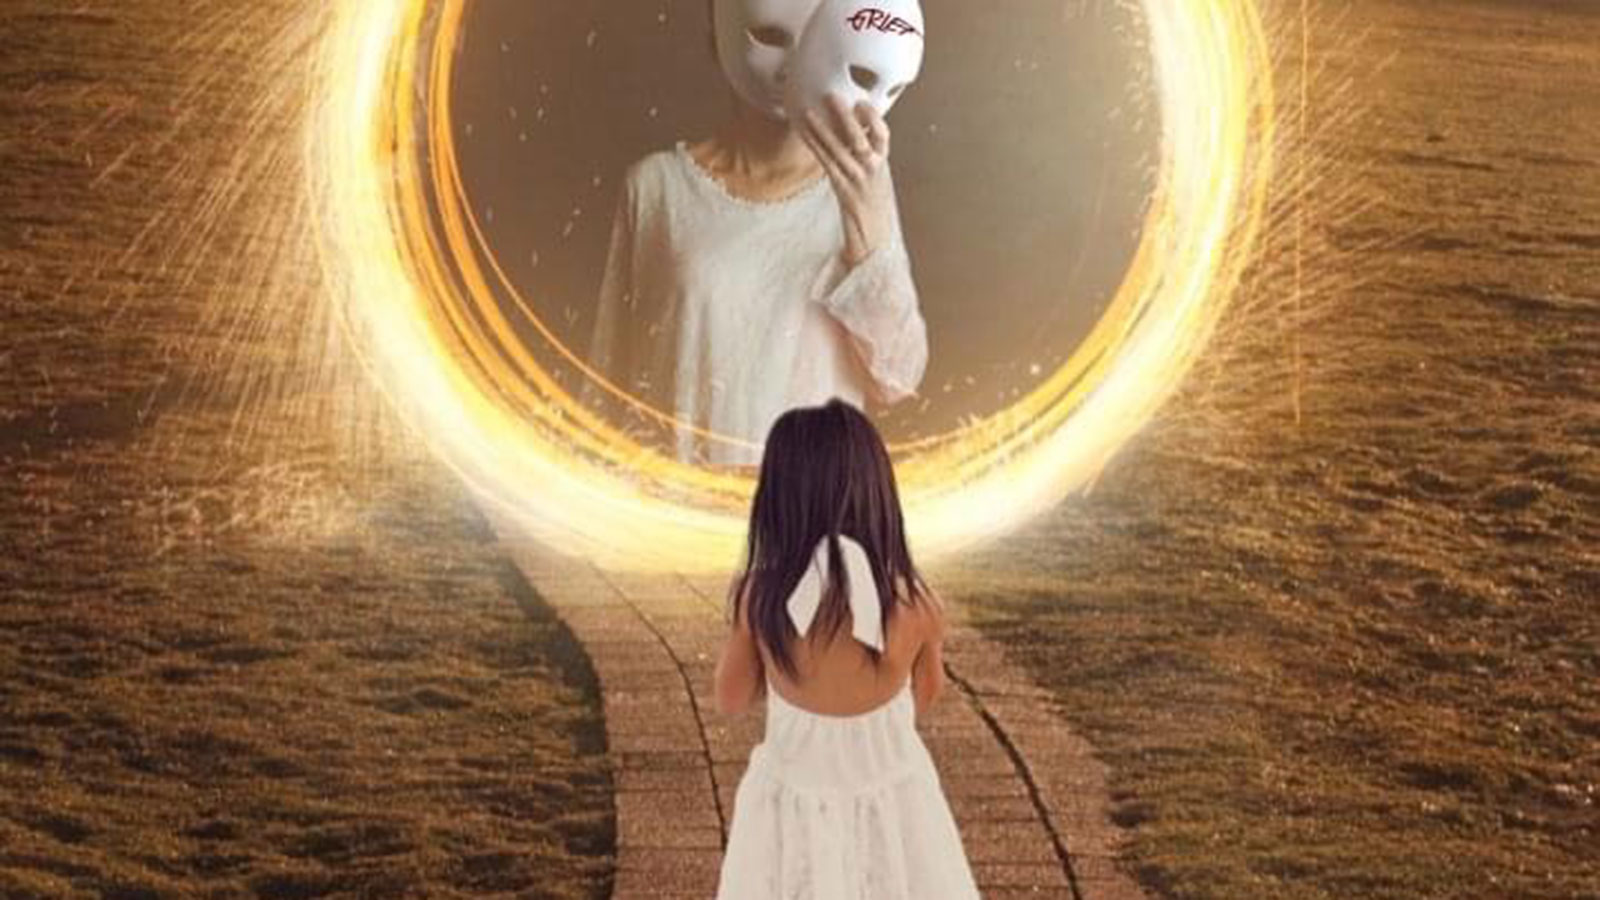 little girl looking into portal seeing person with mask